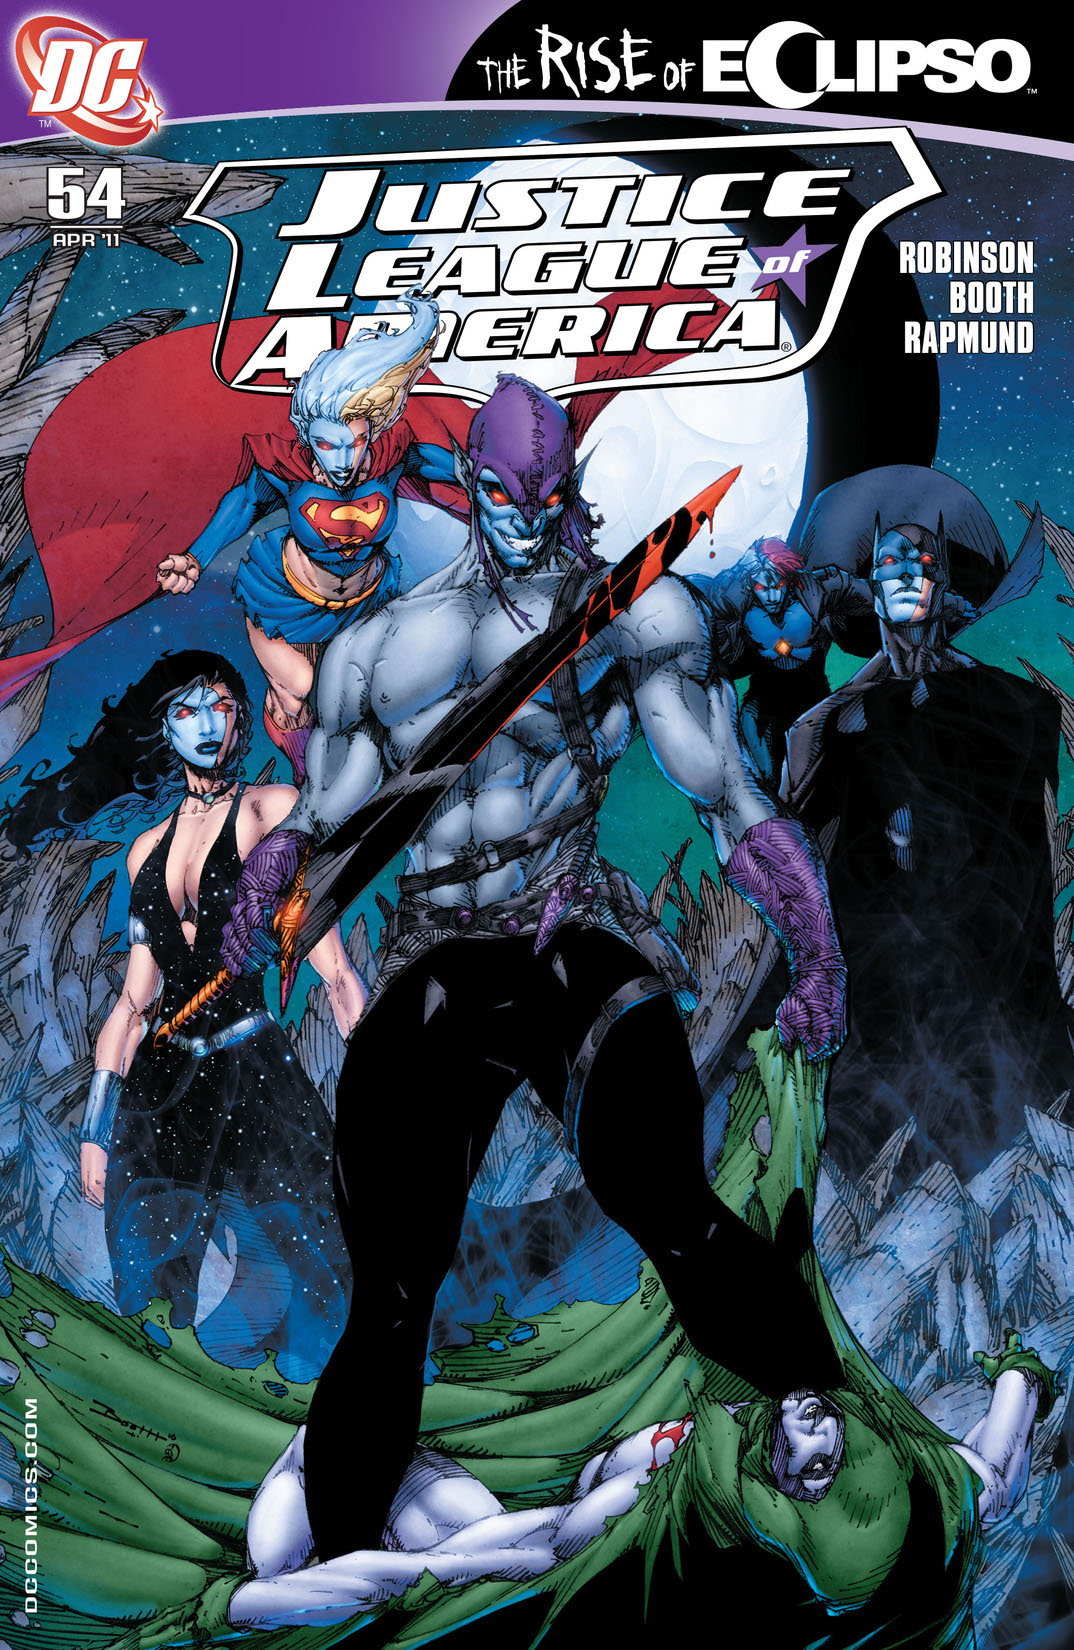 Justice League of America (2006-) #54 preview images